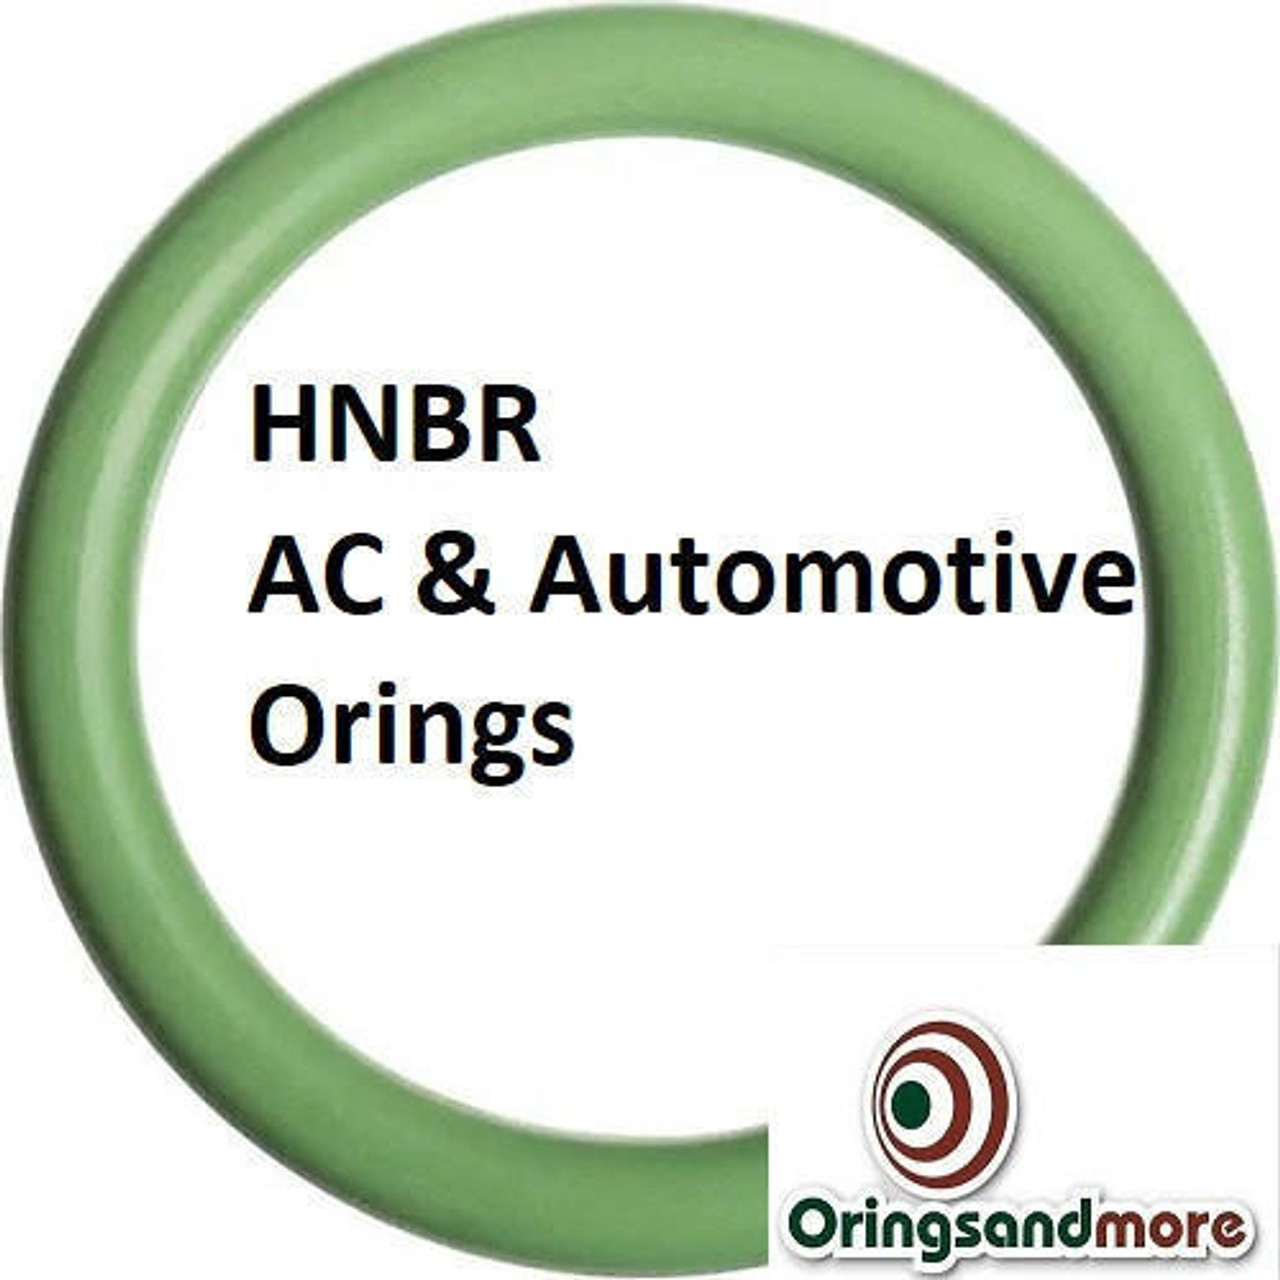 HNBR Orings  # 168-70D Green Price for 1 pc